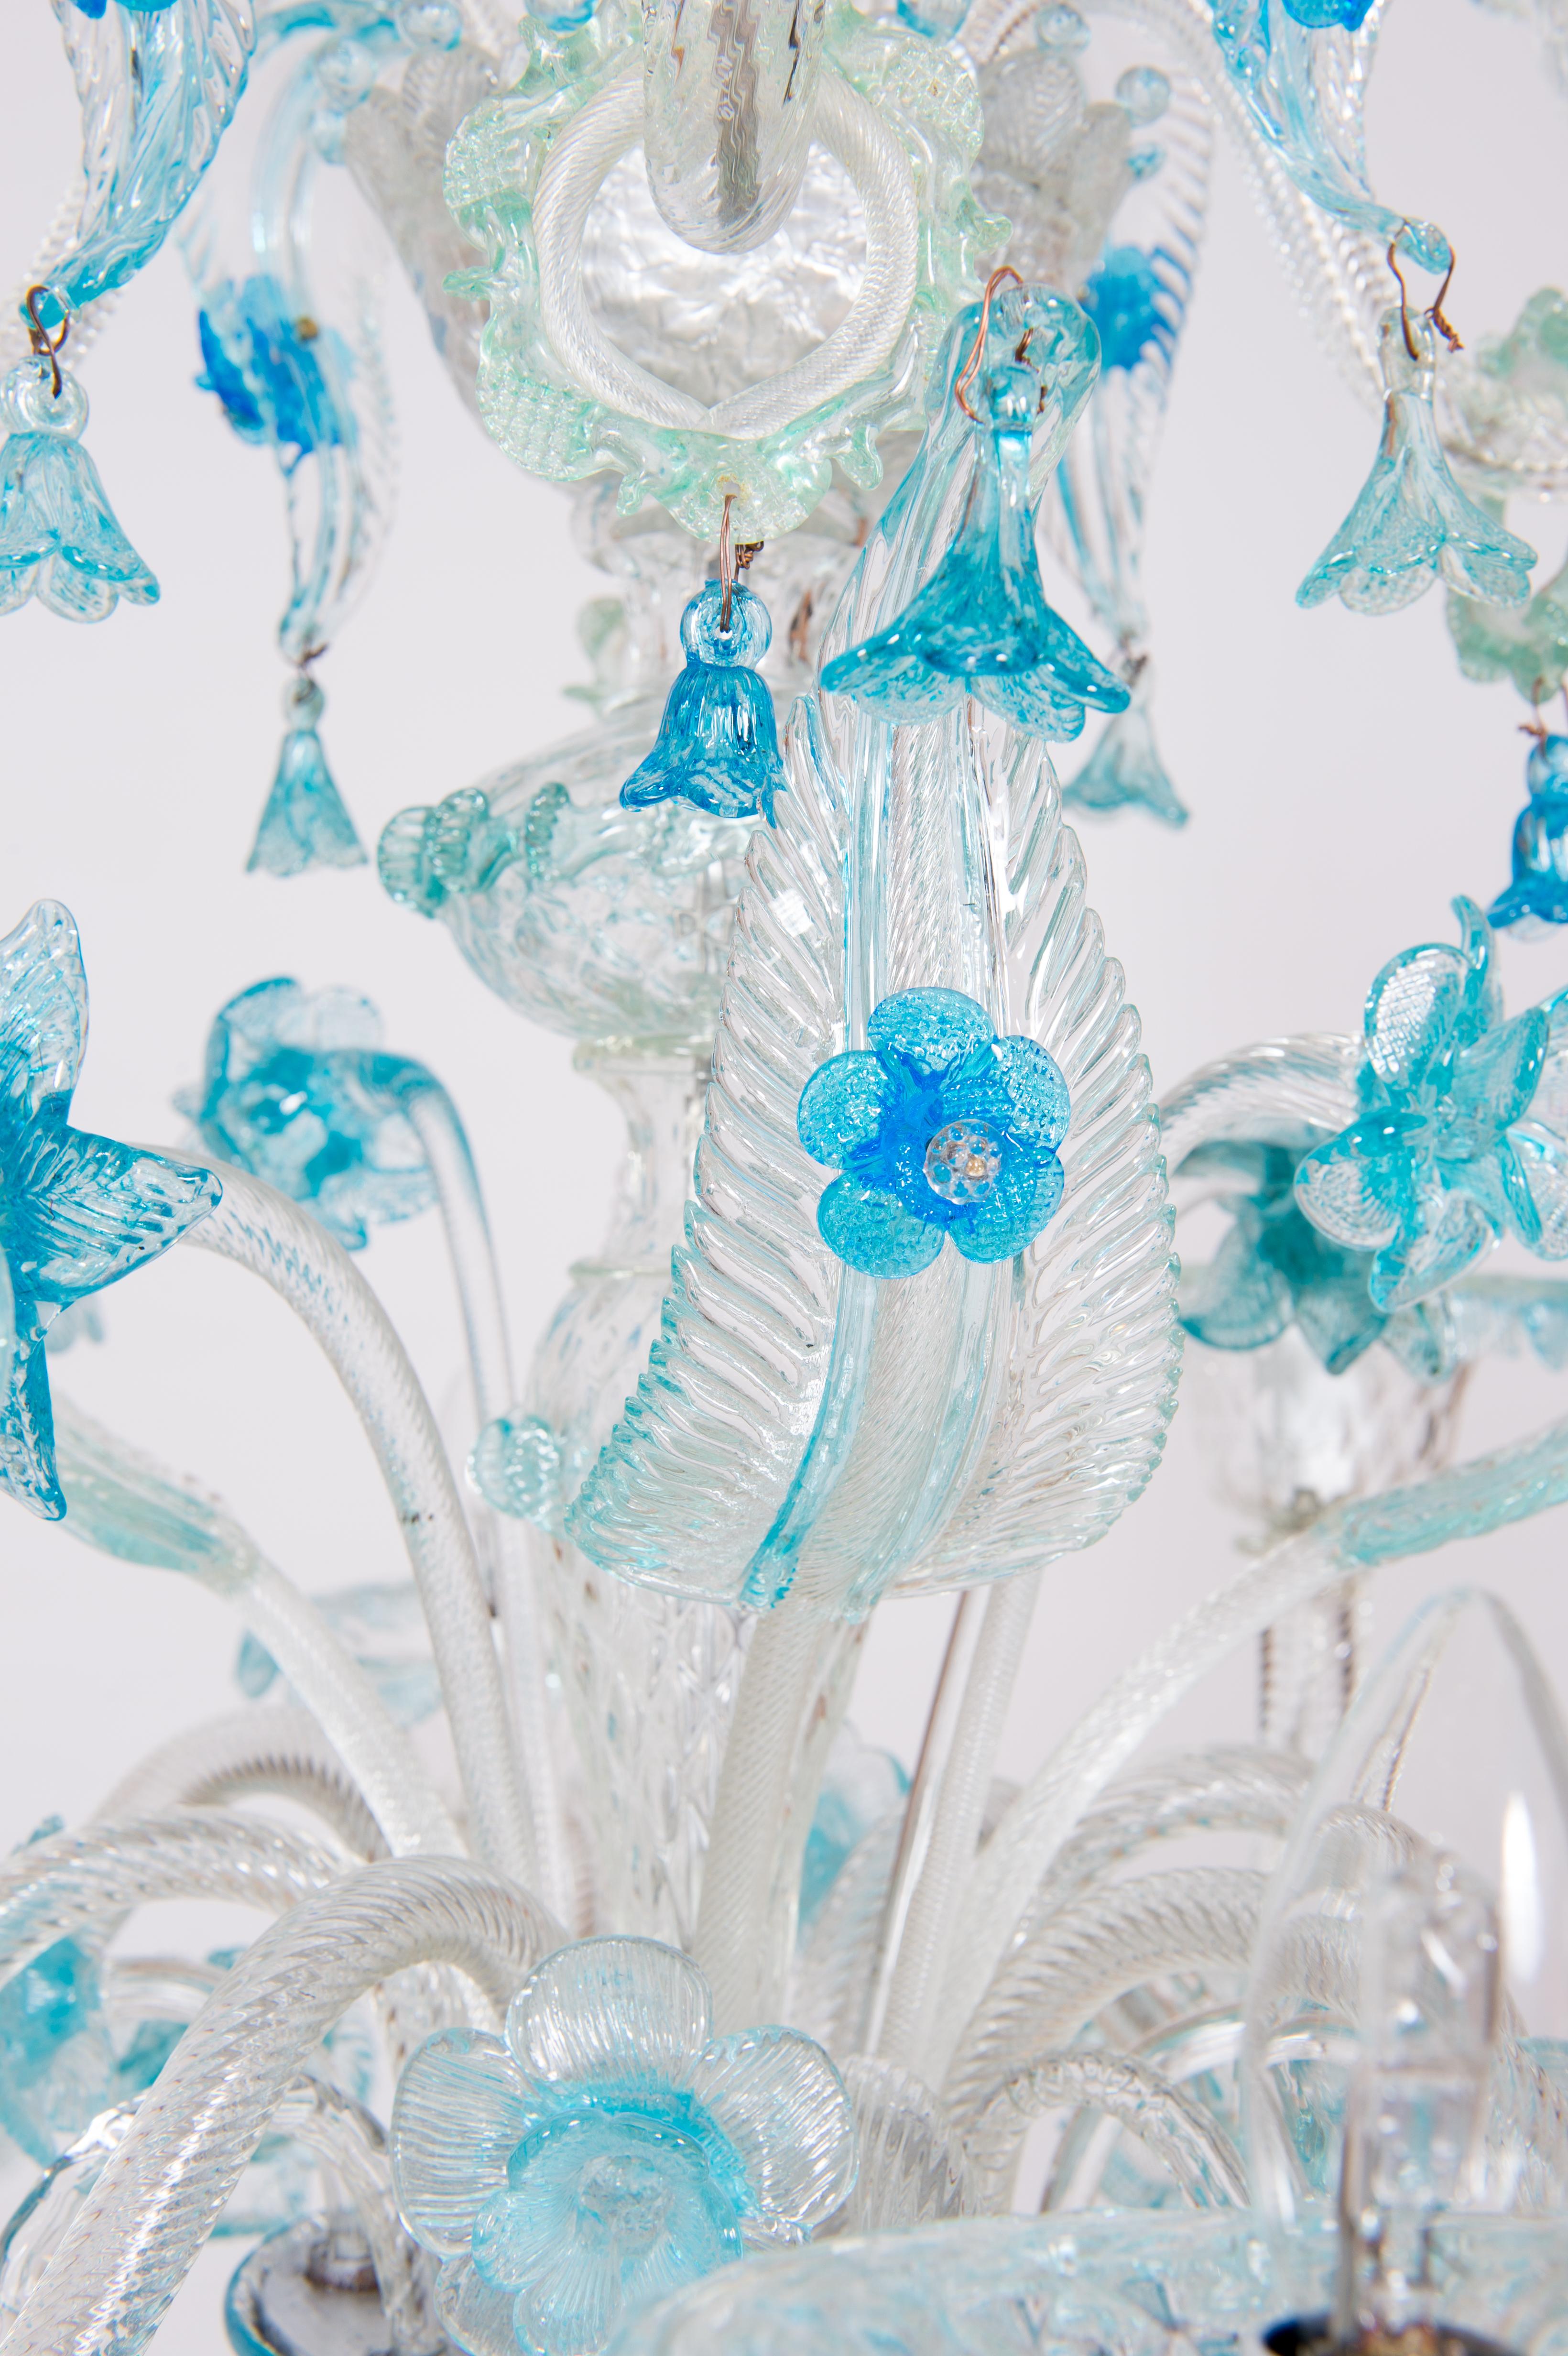 Double Tiered Murano Glass Chandelier in vivid Blue Floral Patterns 1990s Italy For Sale 2